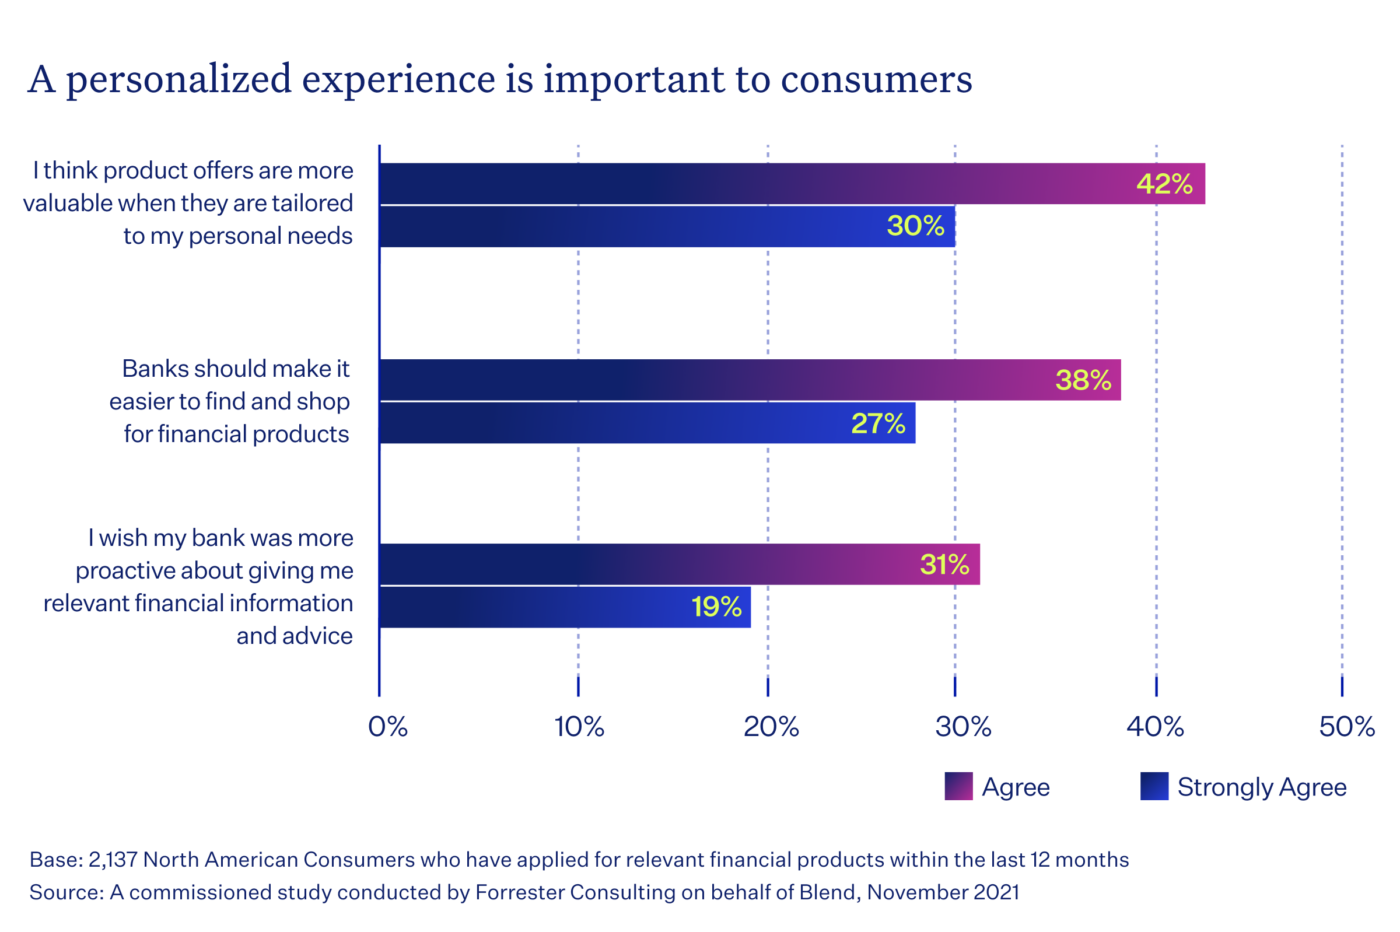 Chart showing how a personalized experience is important to customers